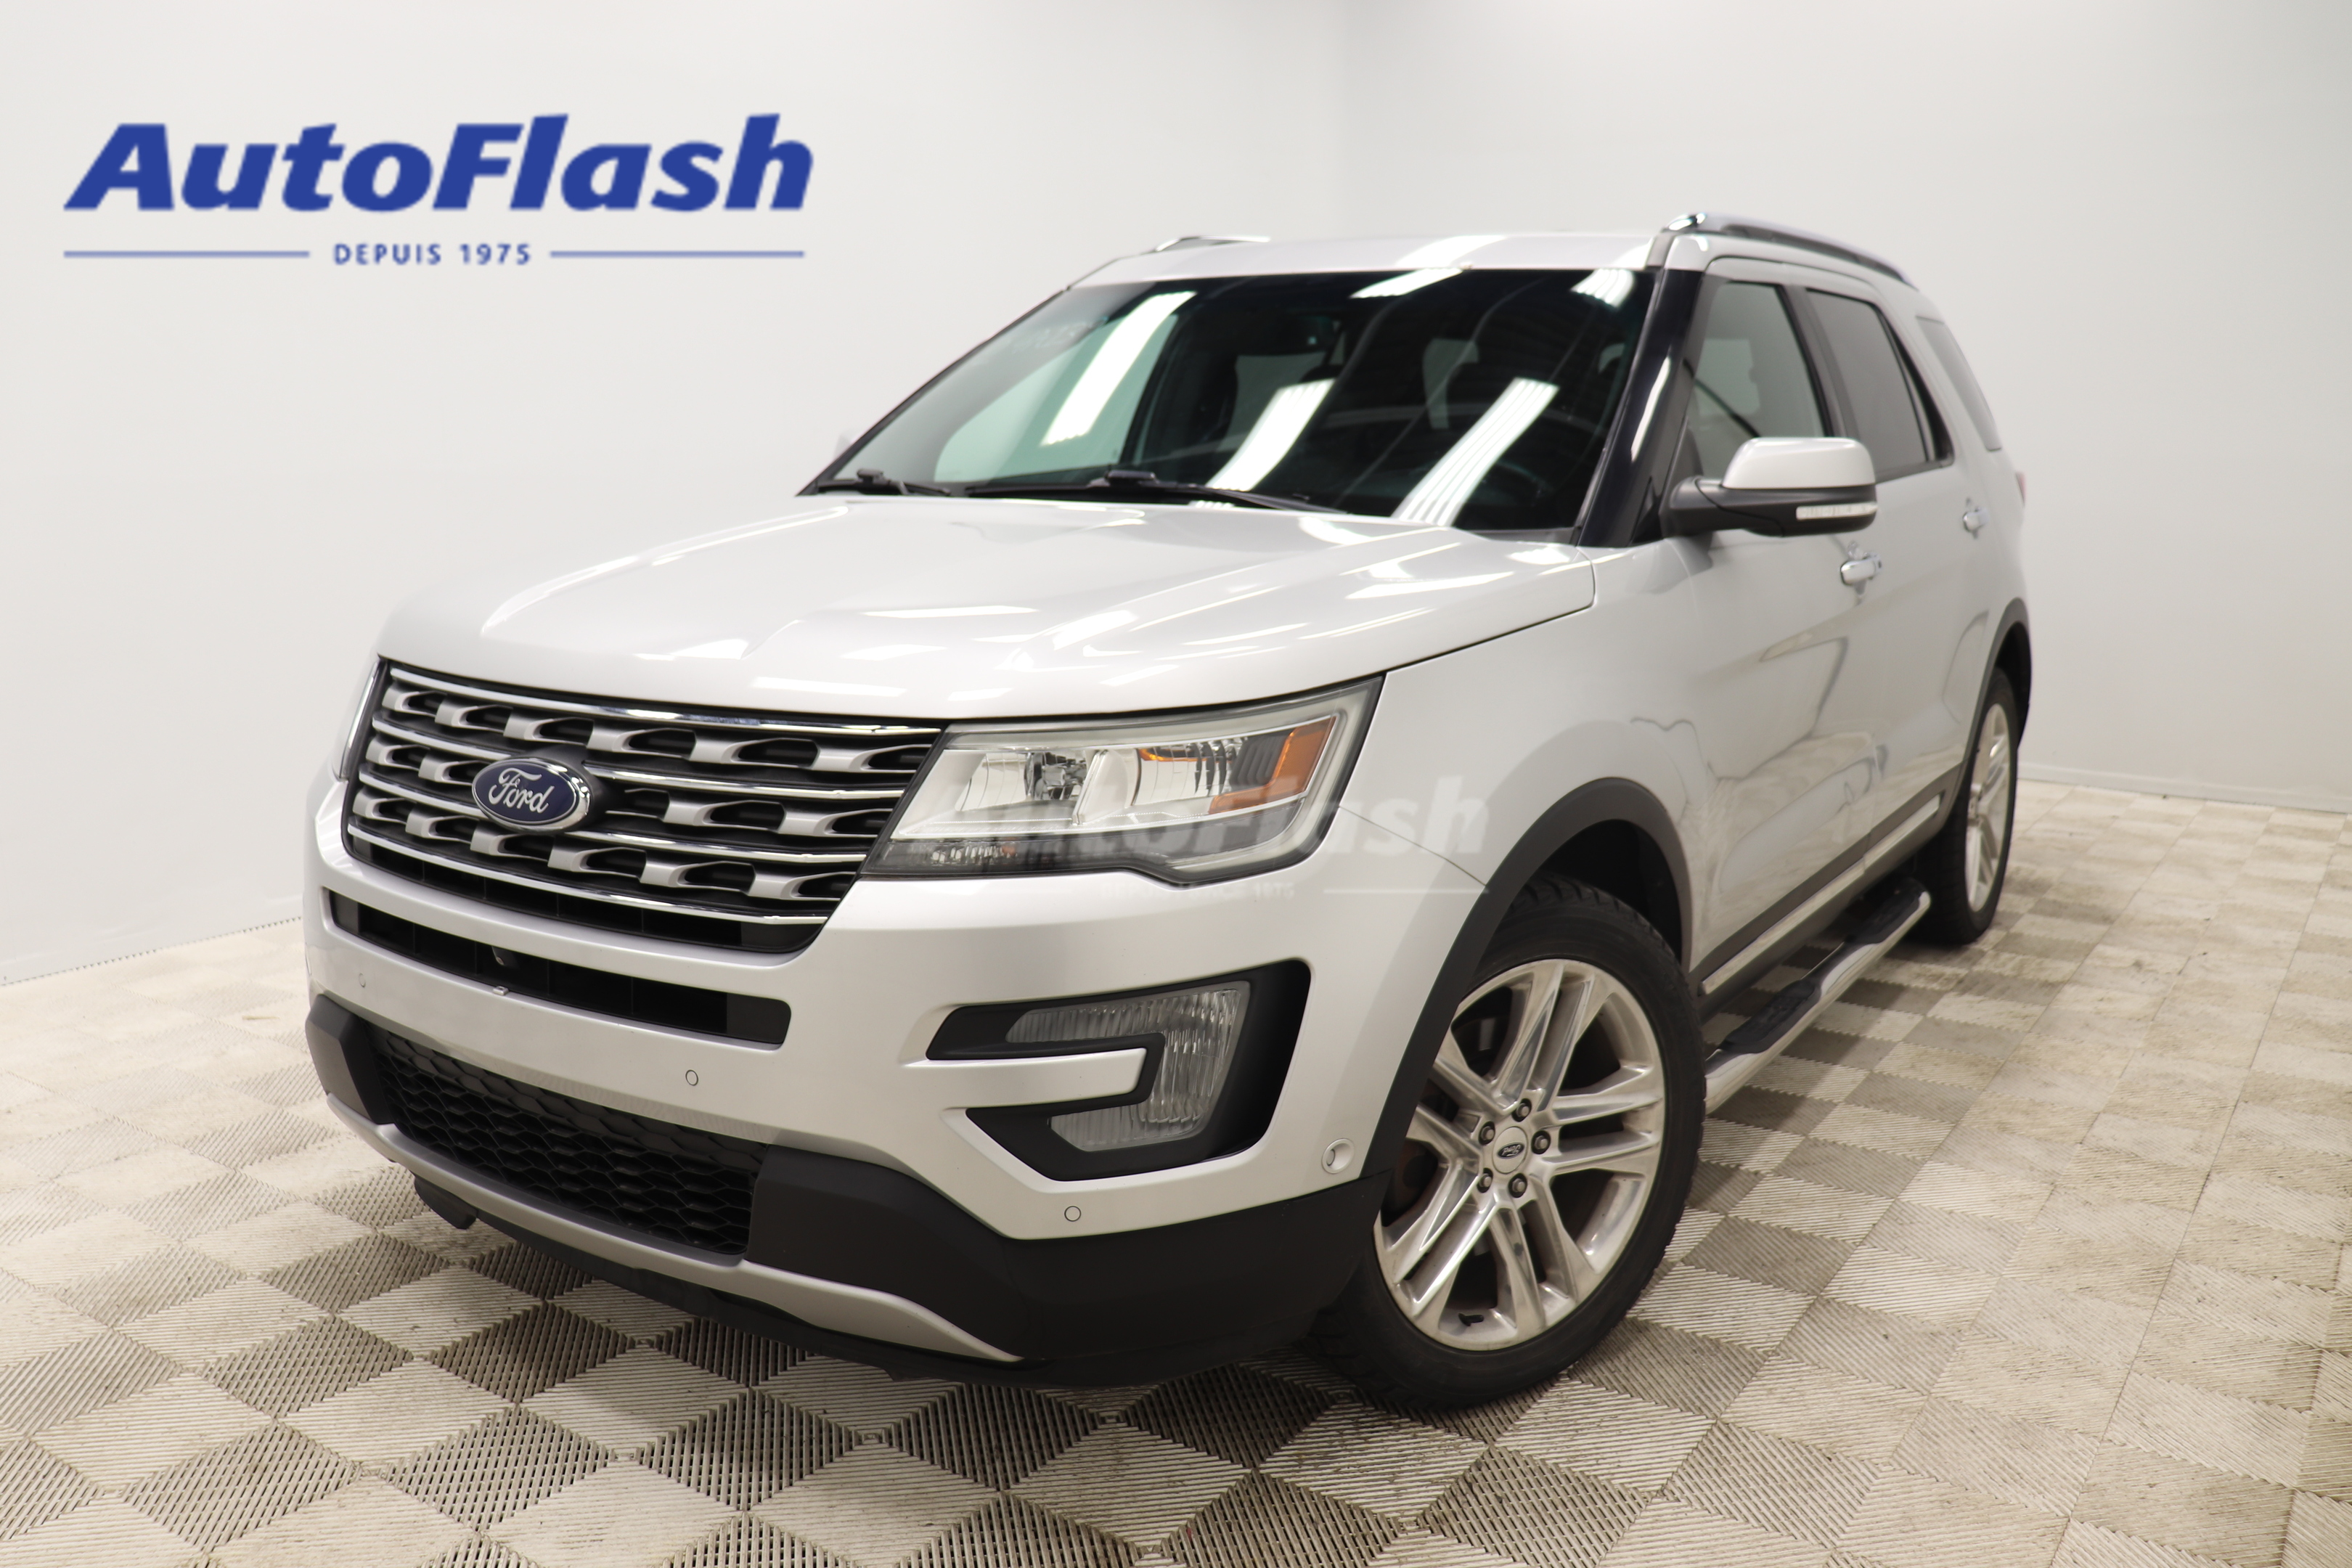 2017 Ford Explorer LIMITED, 8 PASSAGERS, TOIT PANO, SIEGES VENTILE